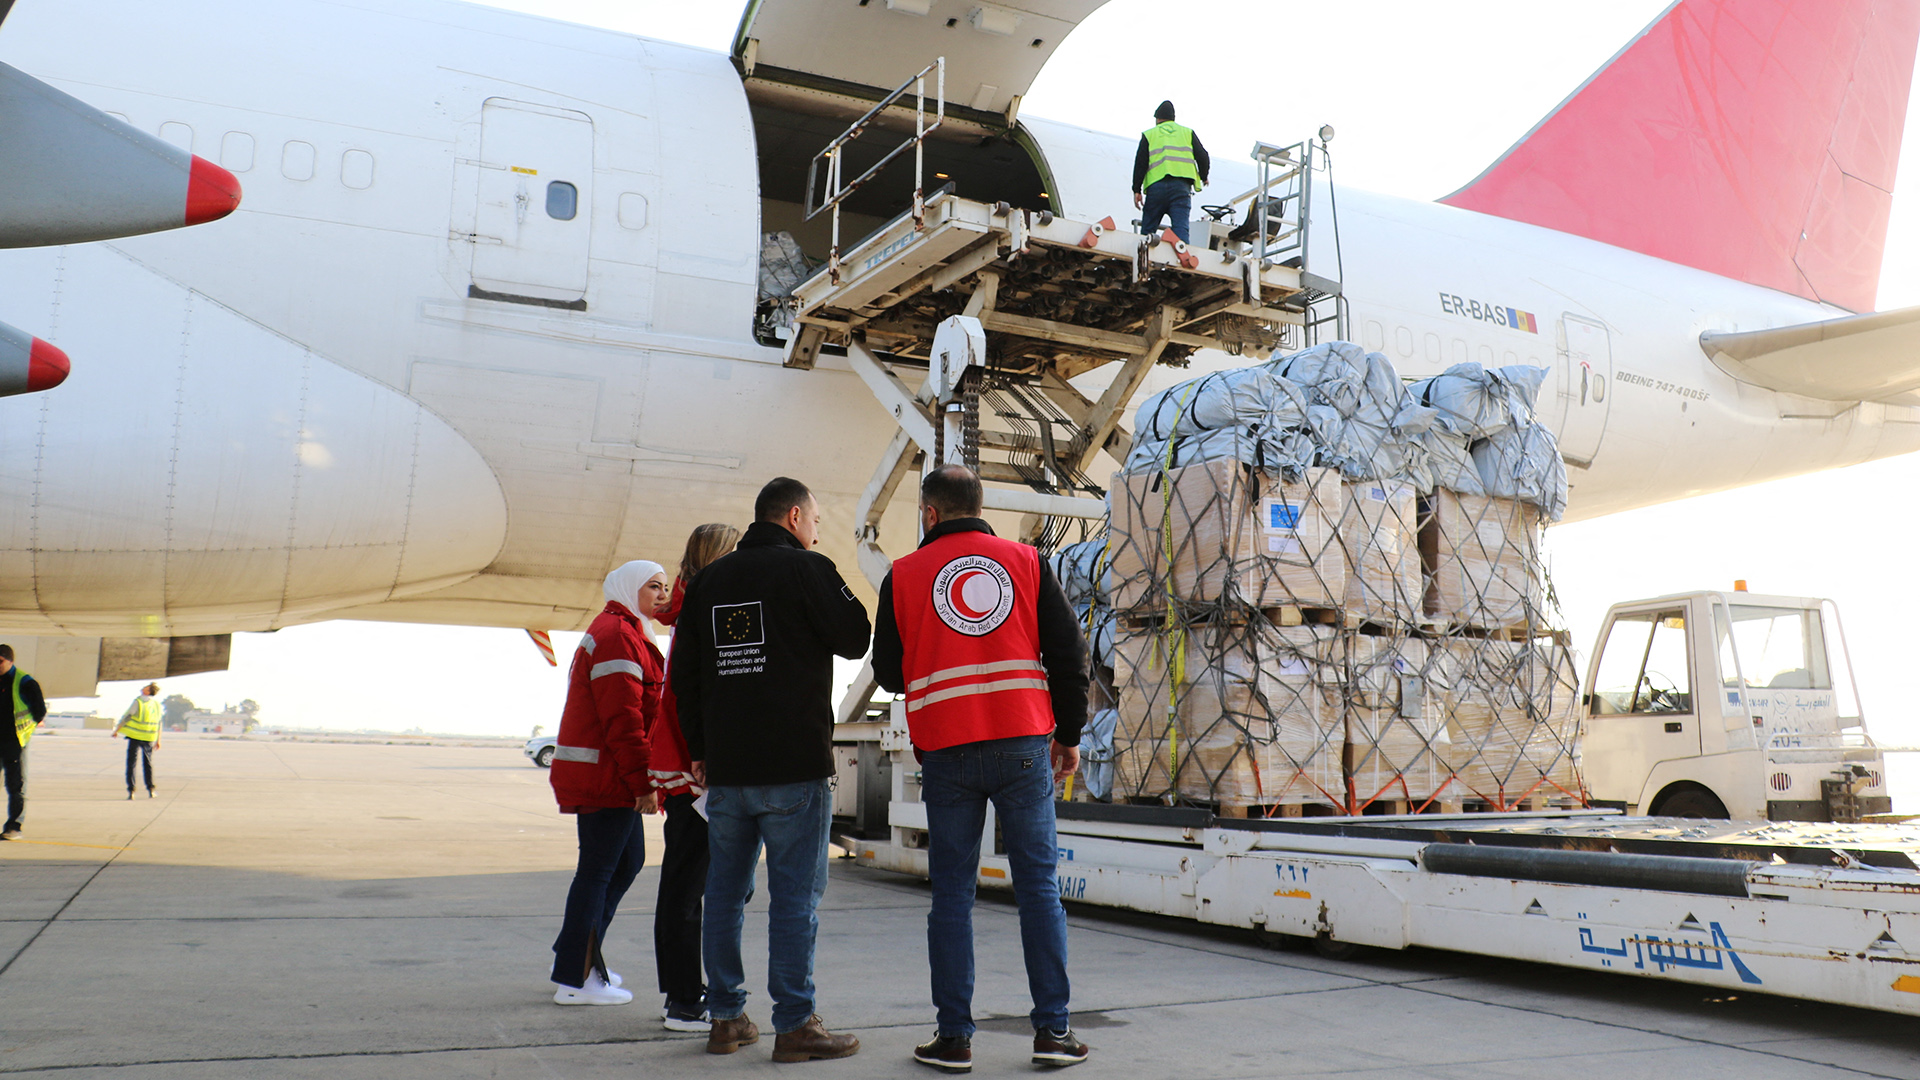 EU air bridge: the first planes carrying relief supplies have landed